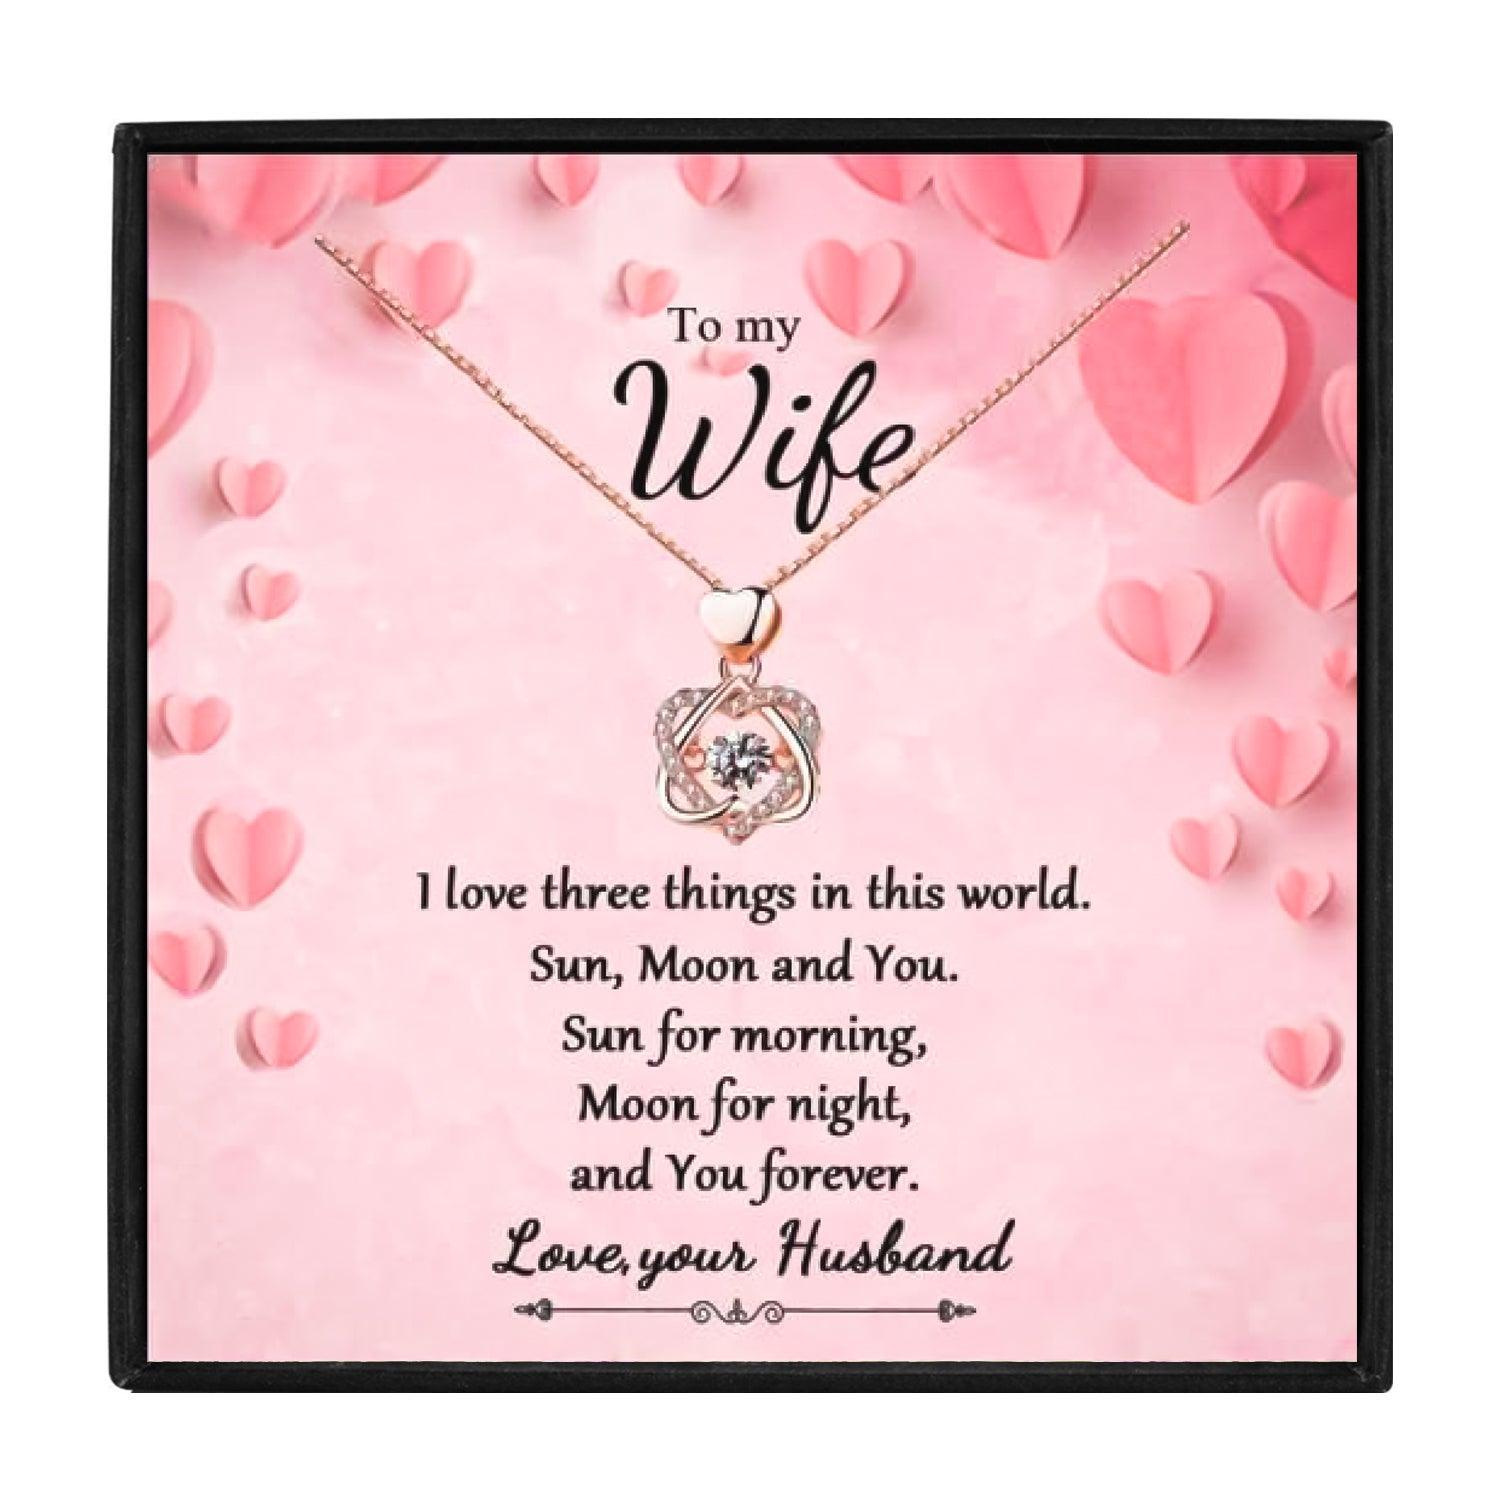 I Love My Wife In Fashion Necklaces for Christmas 2023 | I Love My Wife In Fashion Necklaces - undefined | Fiancée necklace, Future Wife Necklace, I Love My Wife, to my wife necklace, Wife Jewelry Gift Set | From Hunny Life | hunnylife.com